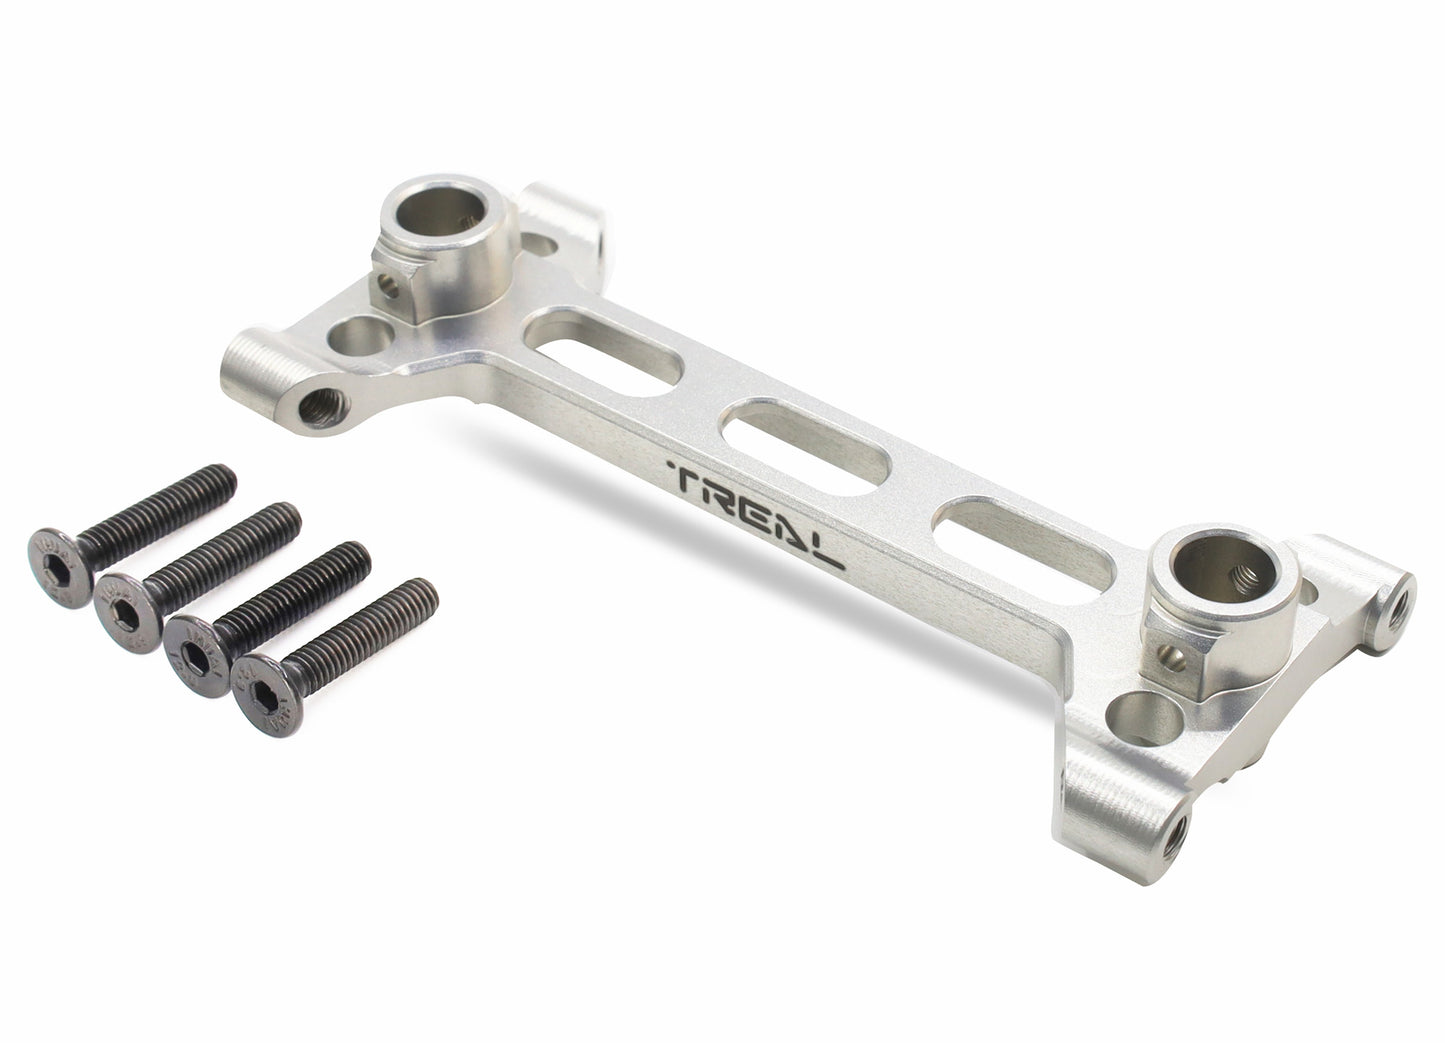 TREAL Aluminum 7075 SCX6 Rear Chassis/Shock Tower Brace, Rr Chass Shock Tower Frame Compatible with Axial SCX6 1/6 Jeep